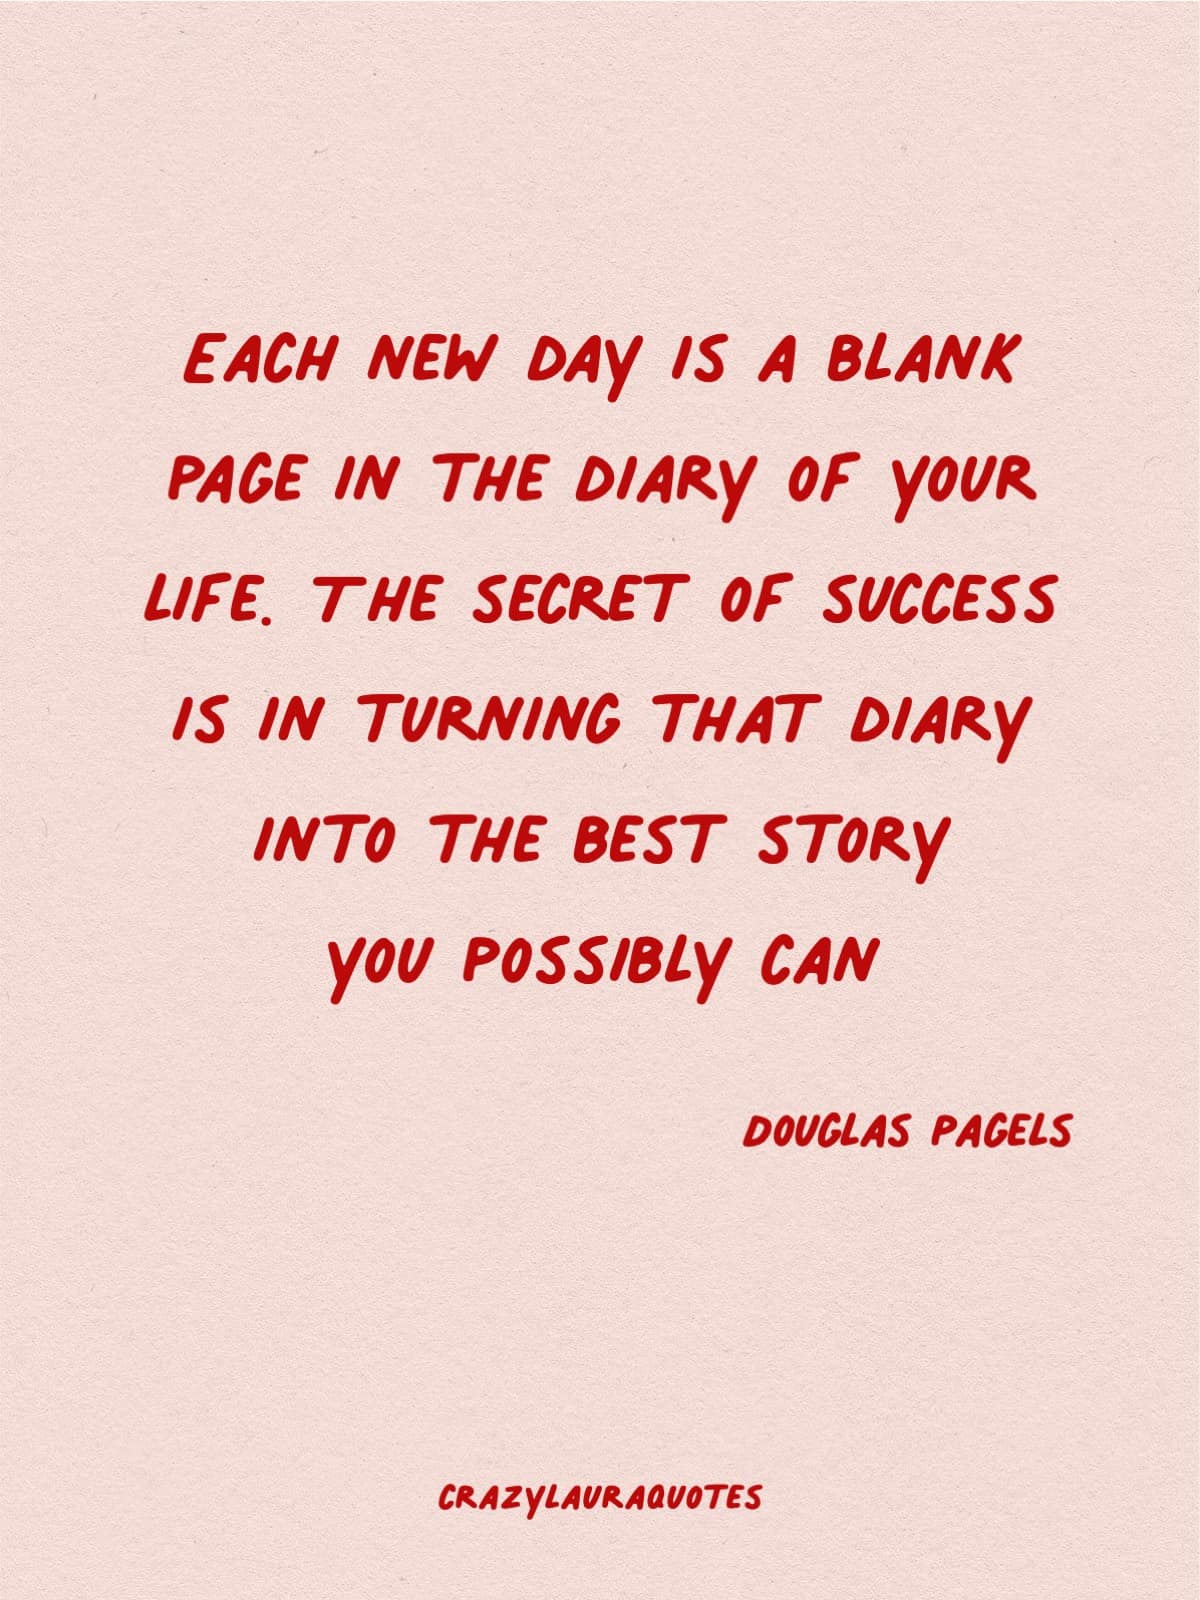 douglas pagels each new day saying